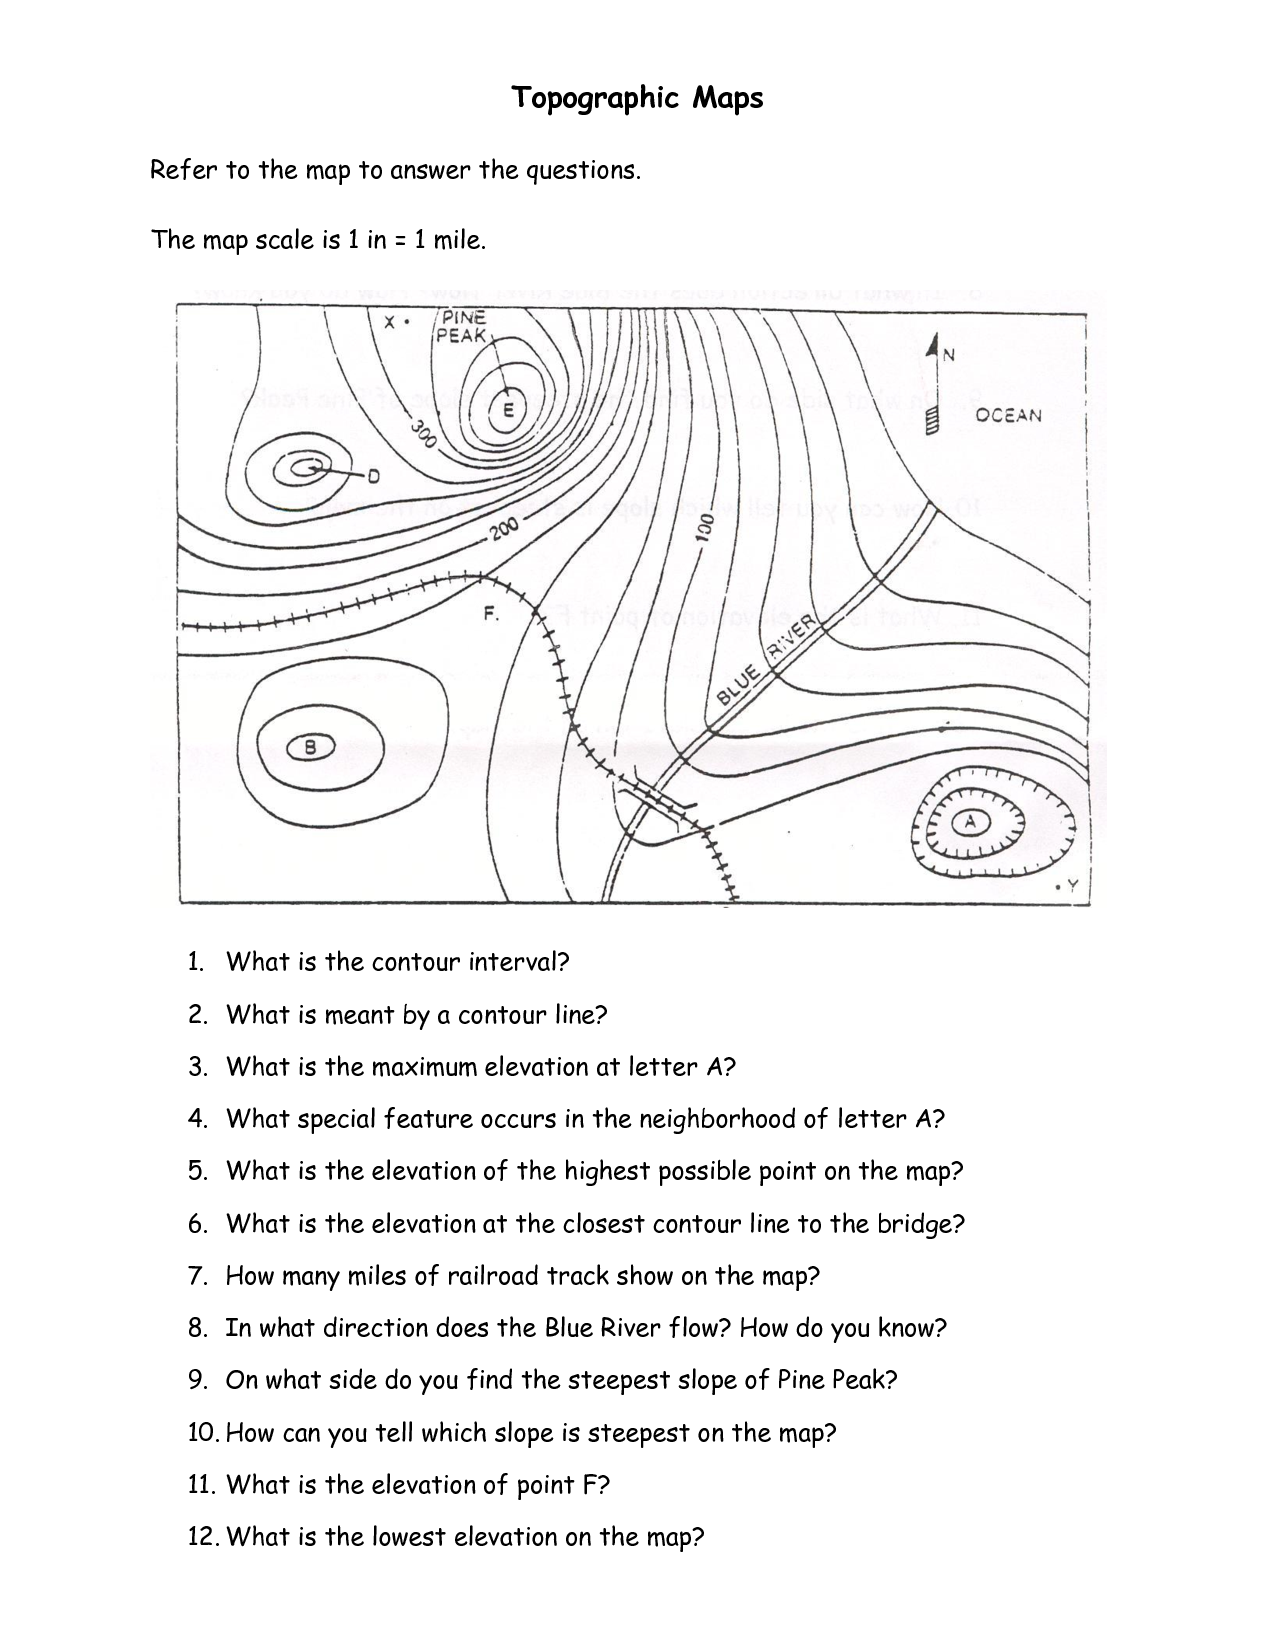 Topographic Map Worksheet Answers